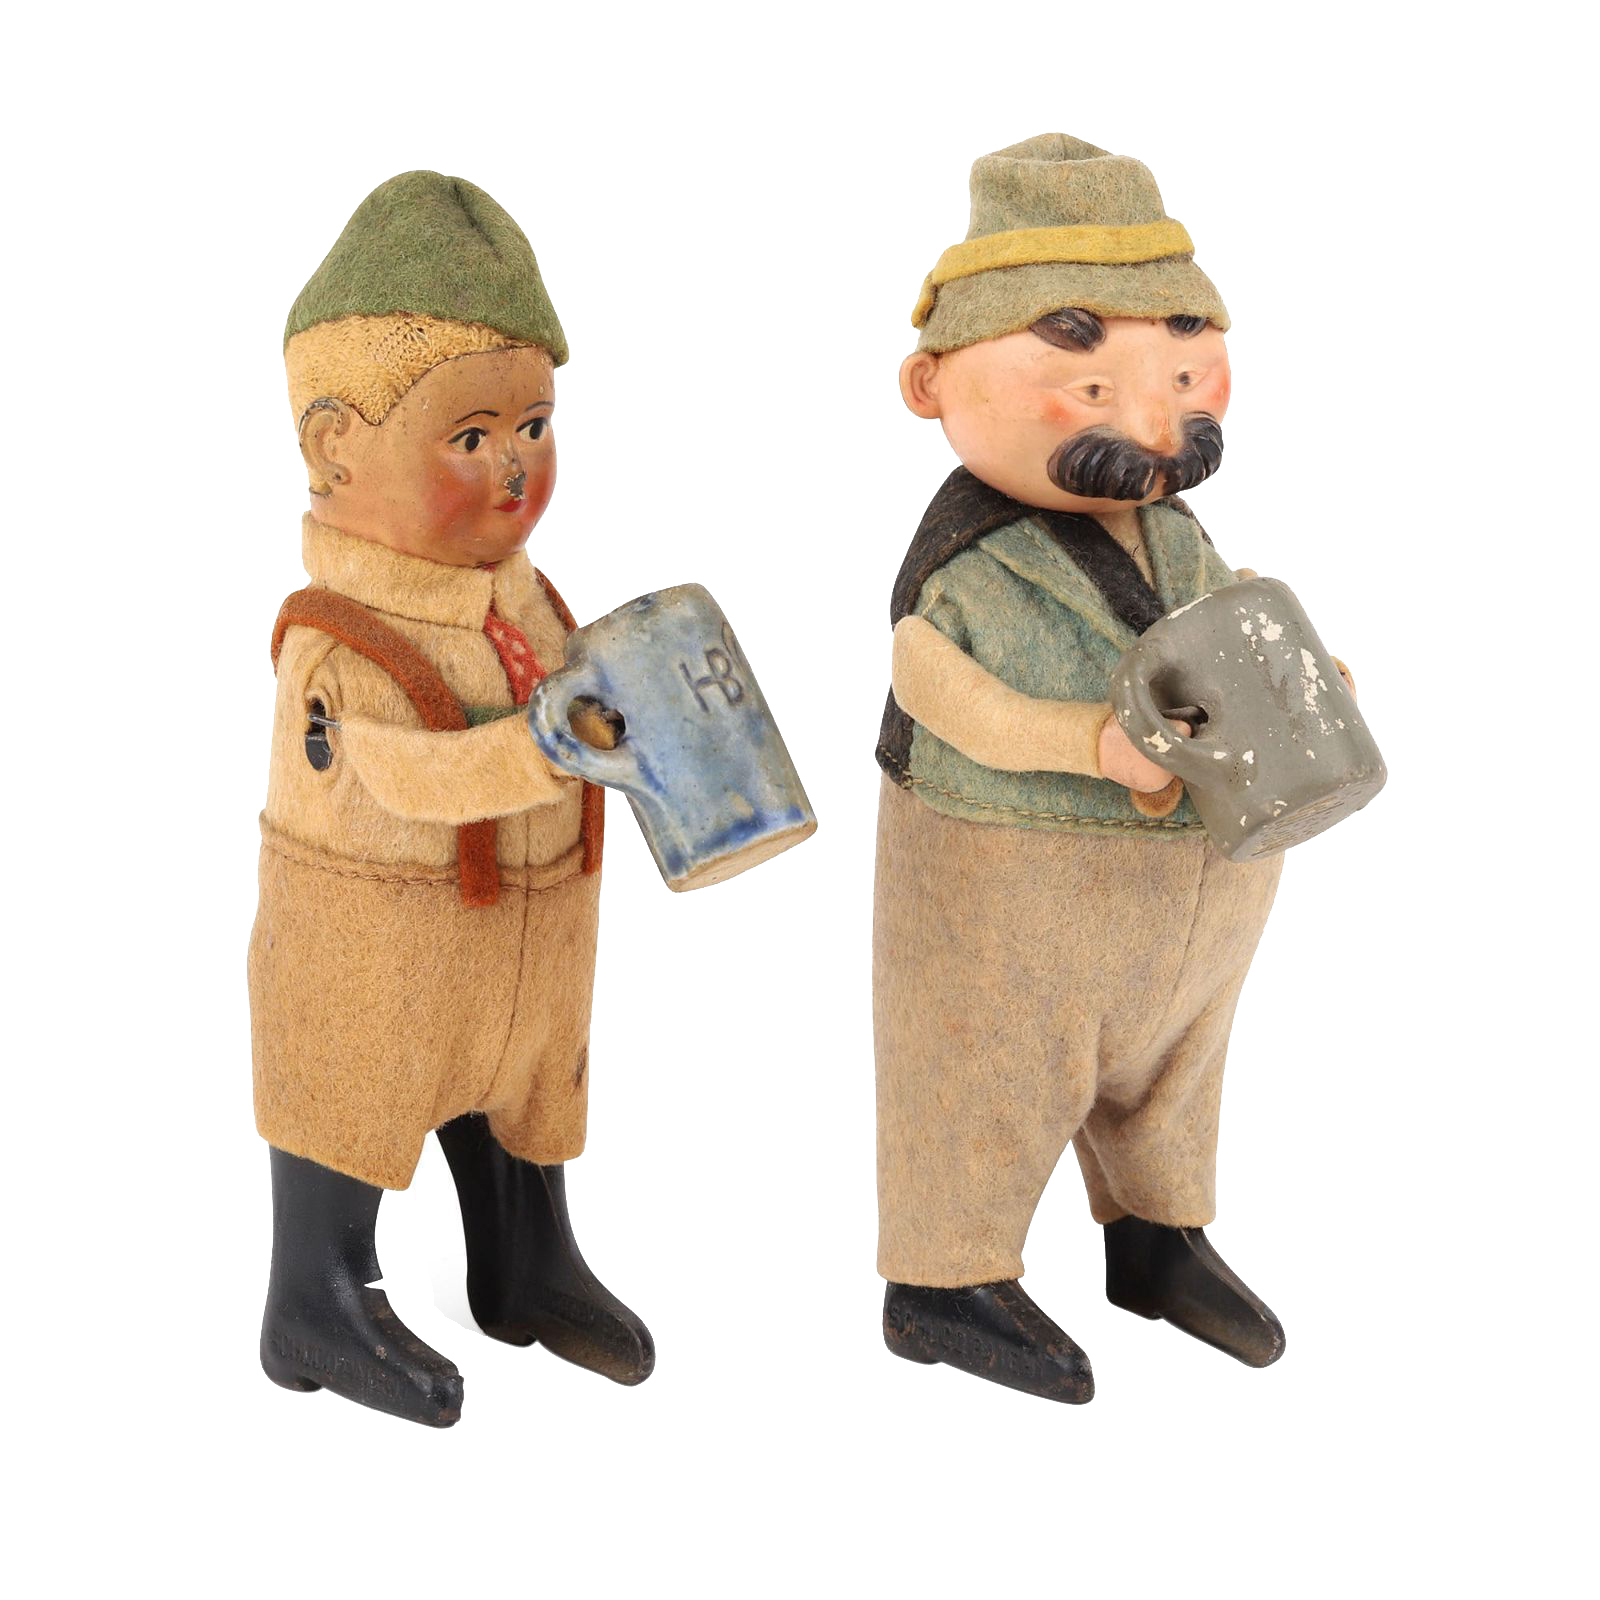 Two 1920s Schuco wind-up figures of Drinking Tyrolians, estimated at CA$200-CA$300 ($150-$220) at Miller & Miller.